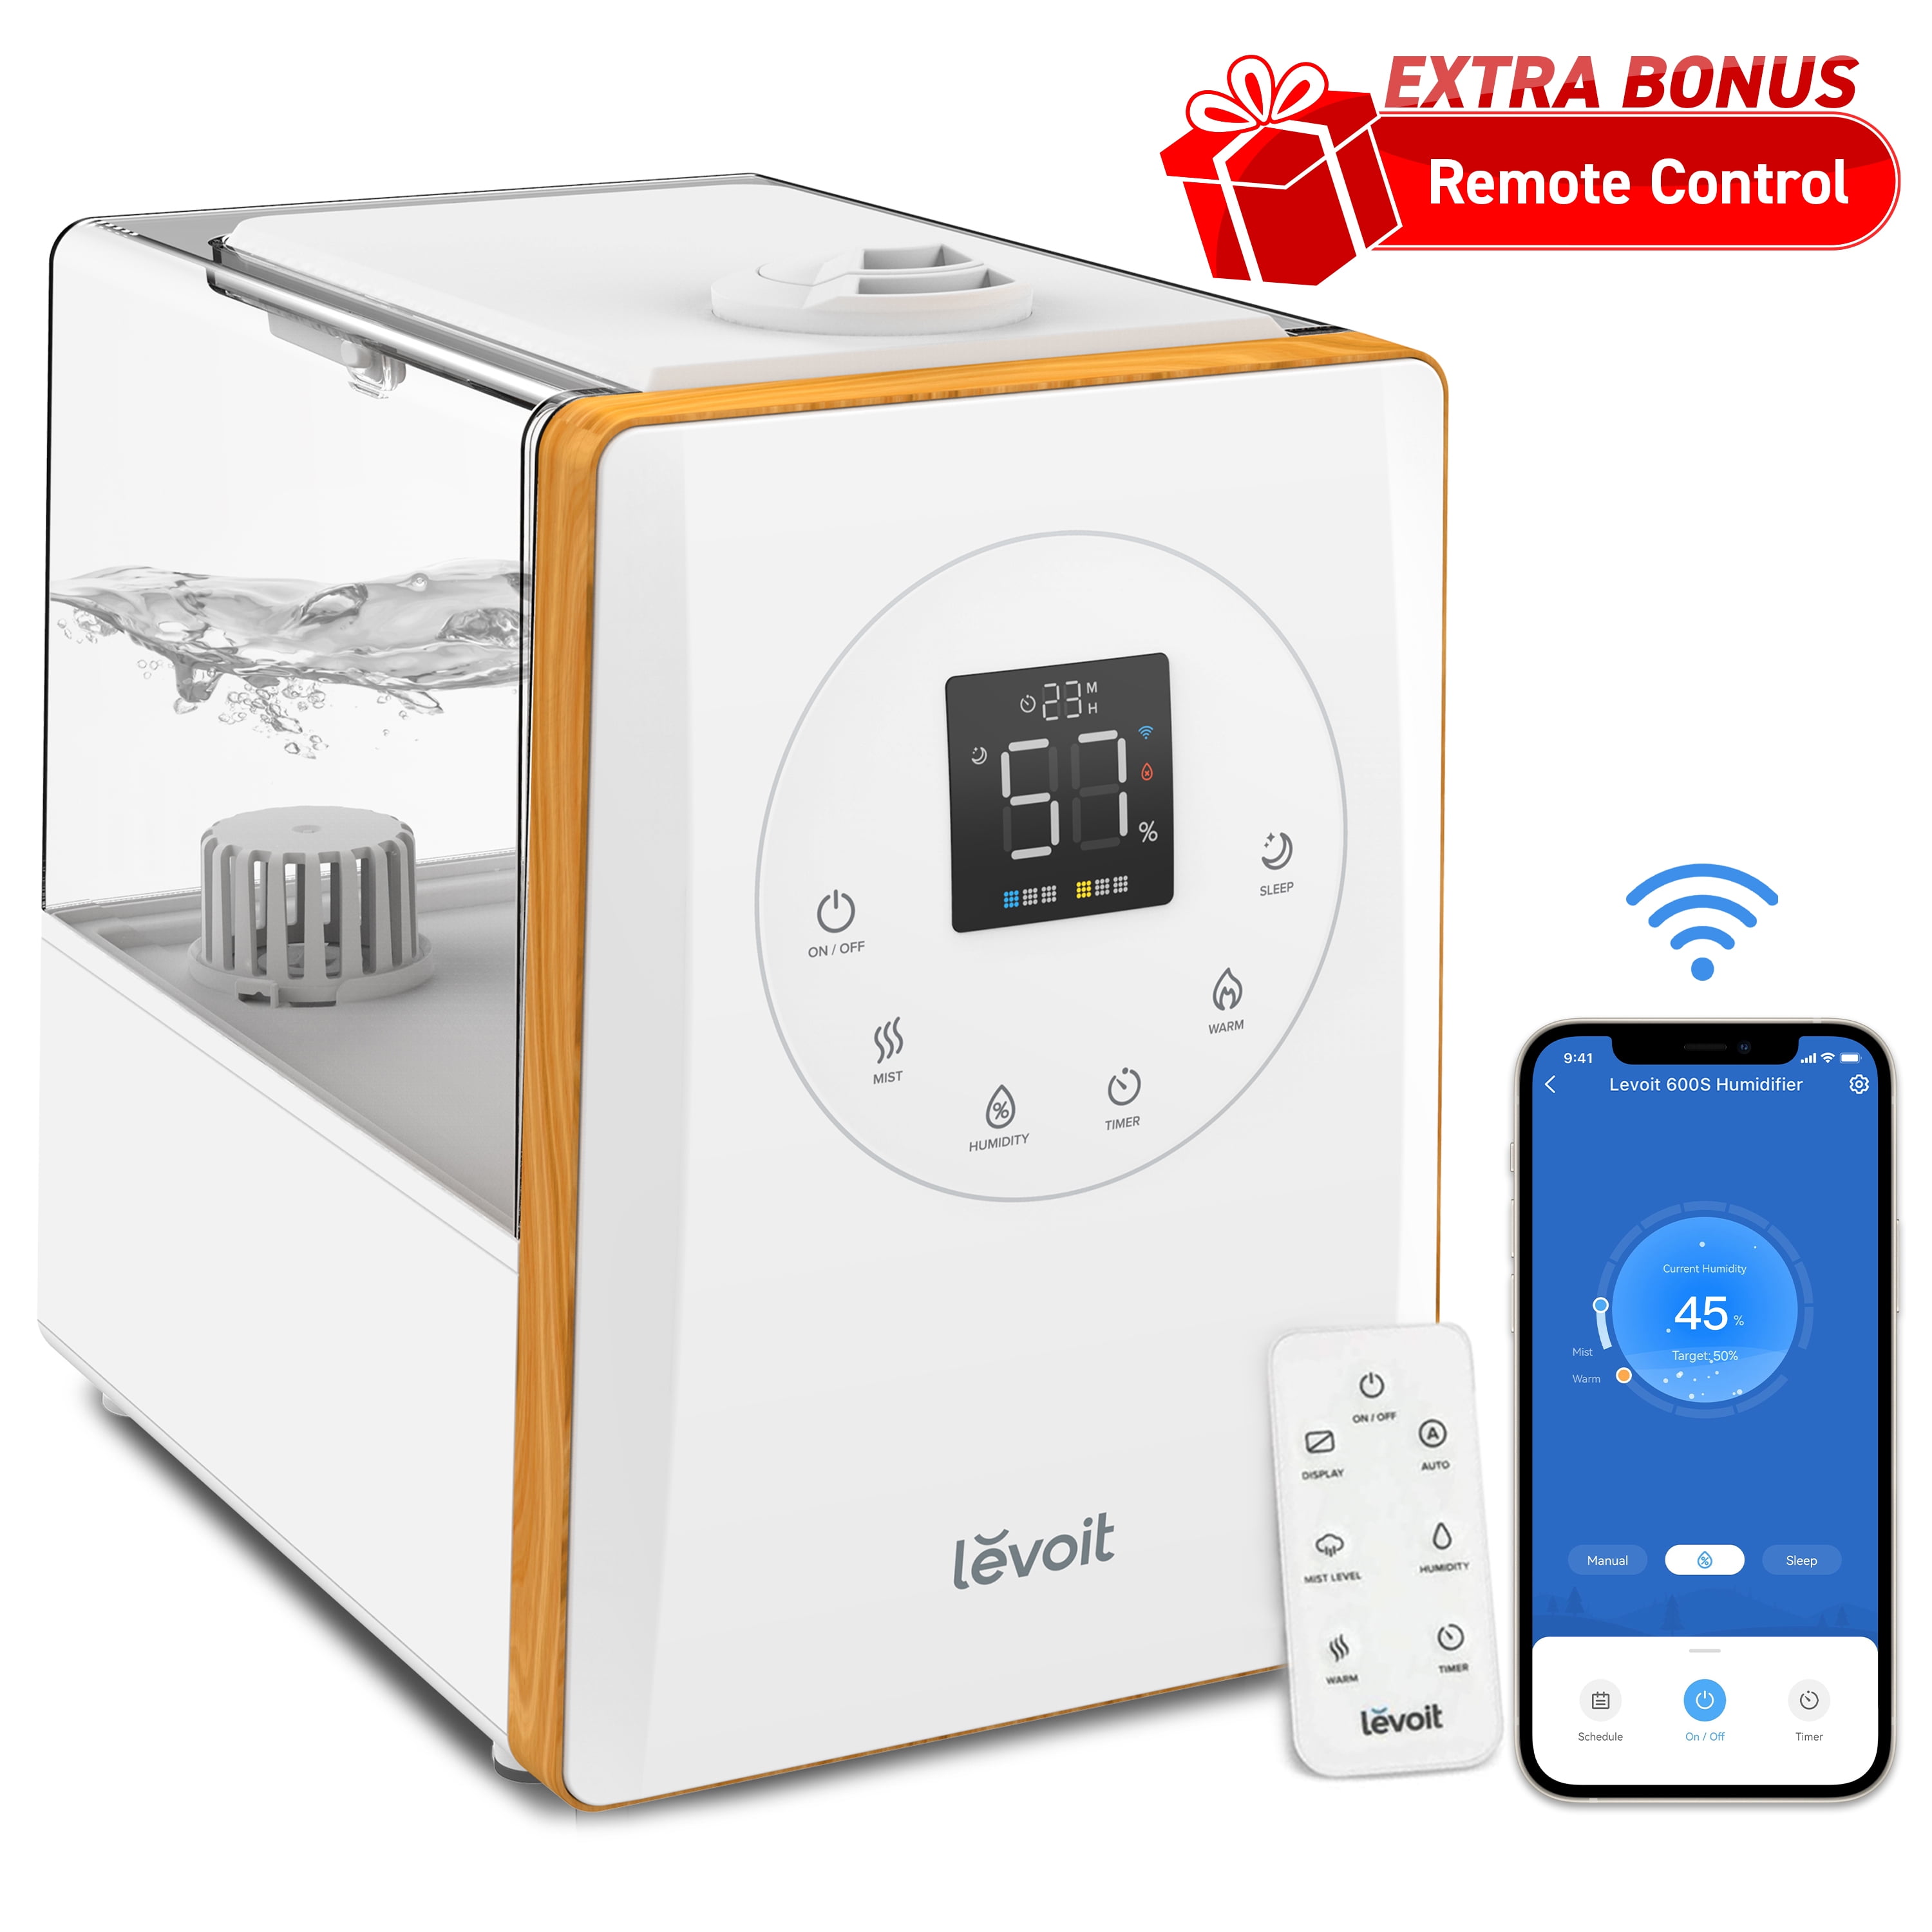 Levoit Smart Warm and Cool Mist Humidifier for Room, 6L Top Fill Air  Vaporizer for Large Rooms, LV600s, White 